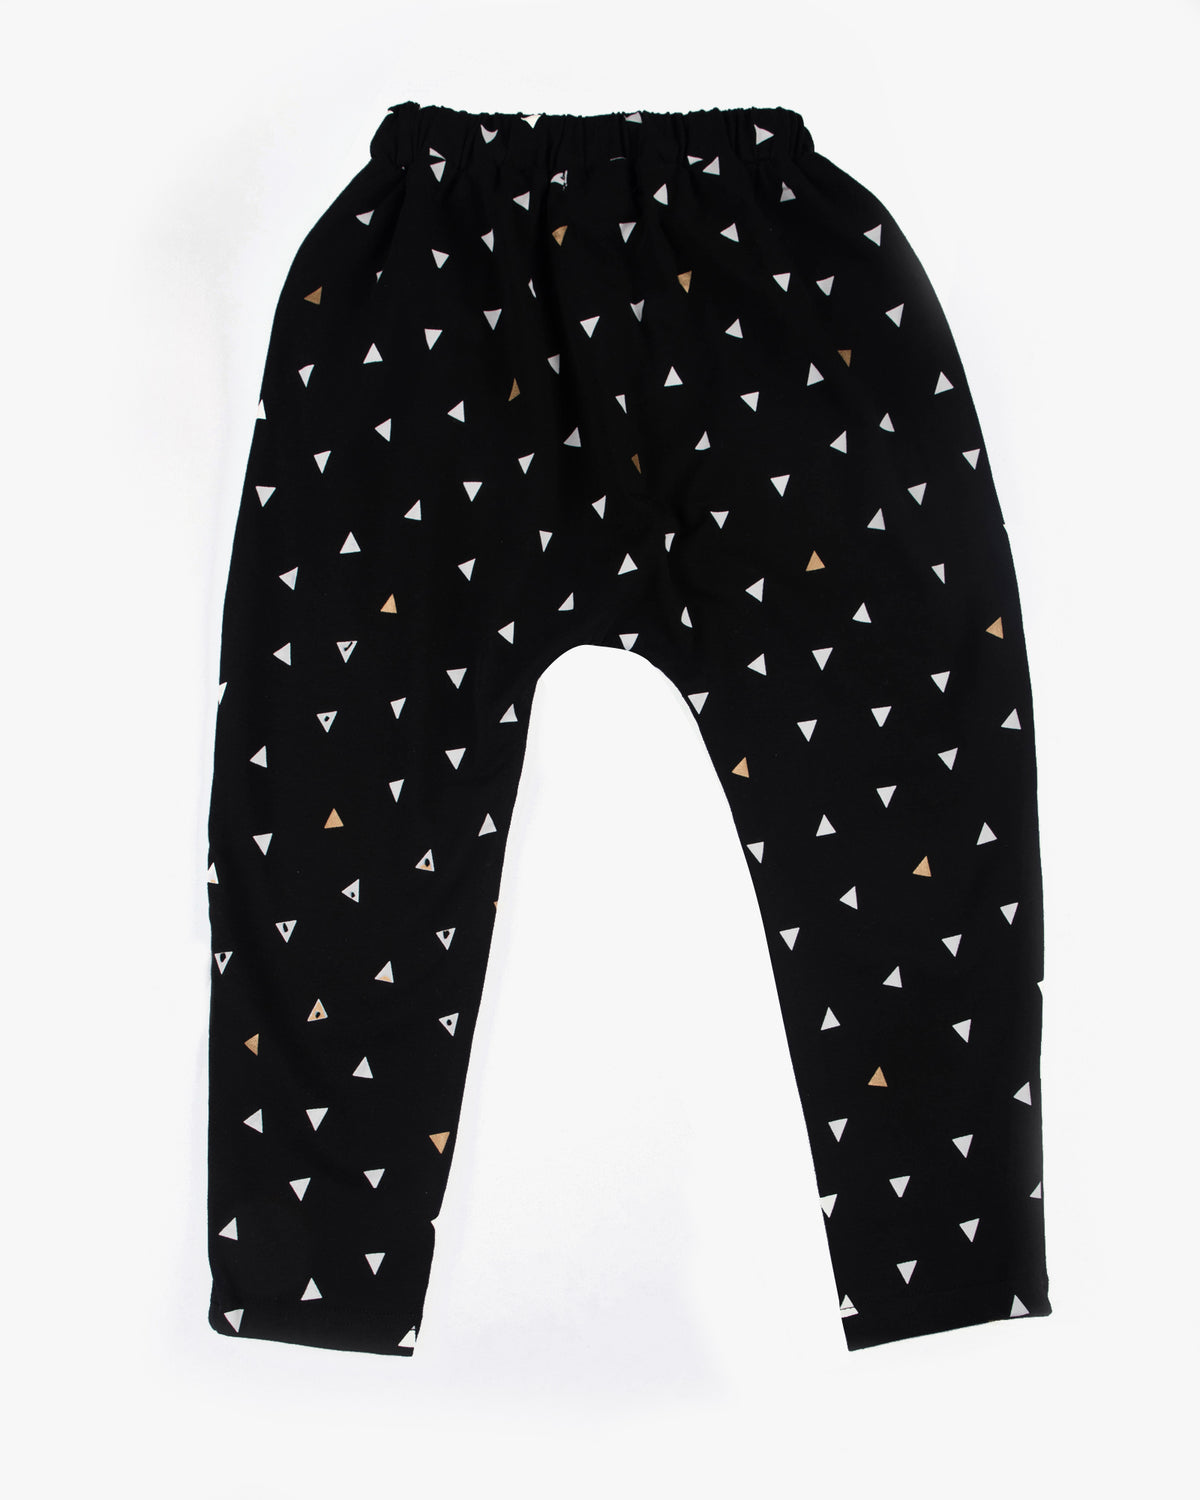 Slouch Pant in Triangle Print black back